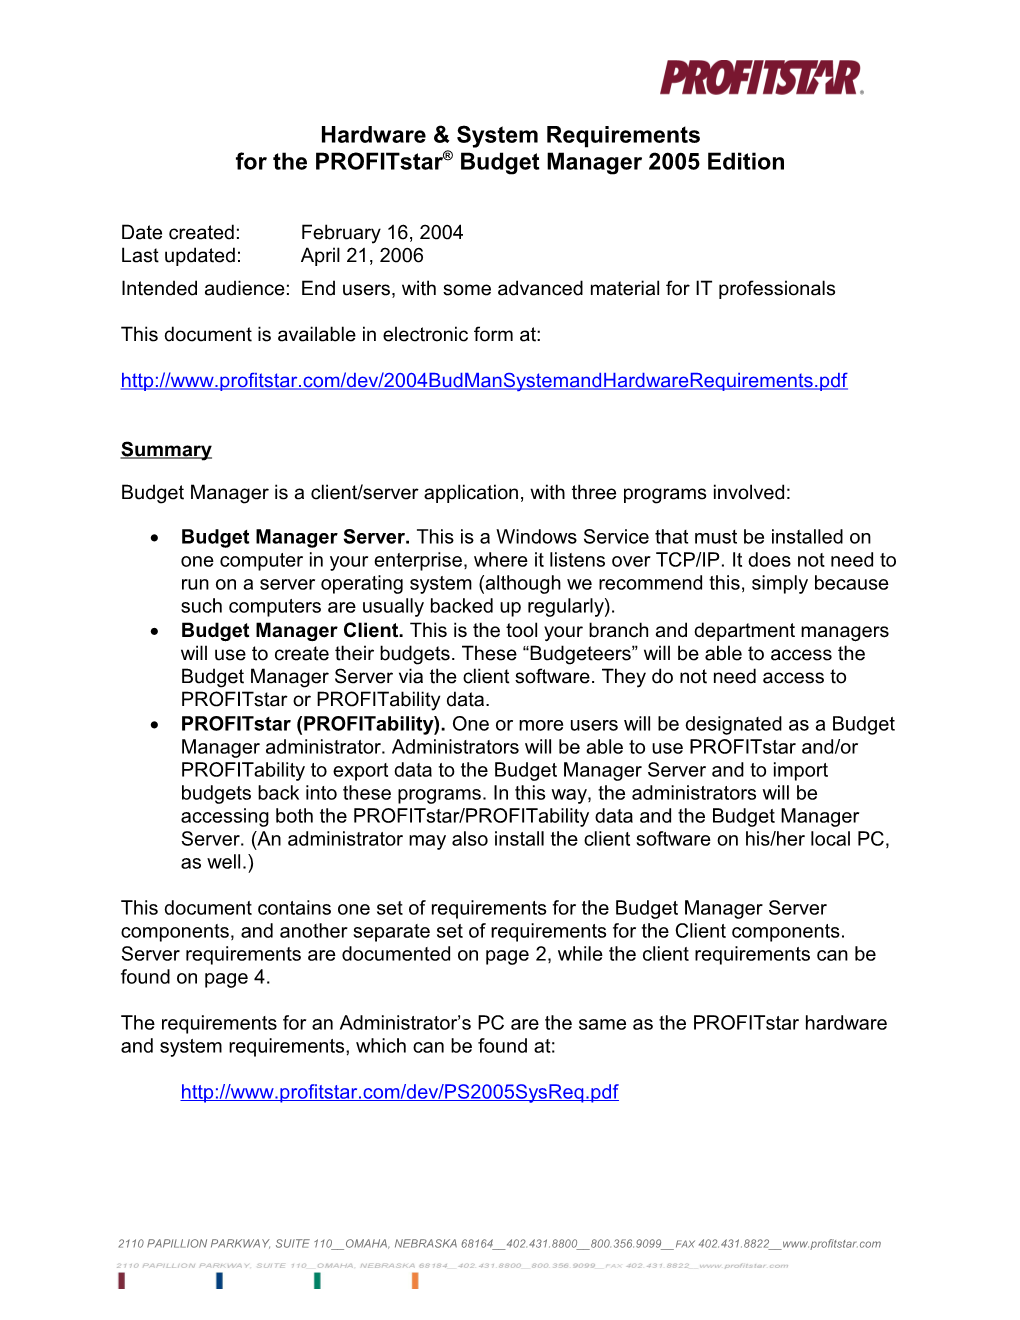 For the Profitstar Budget Manager 2005 Edition